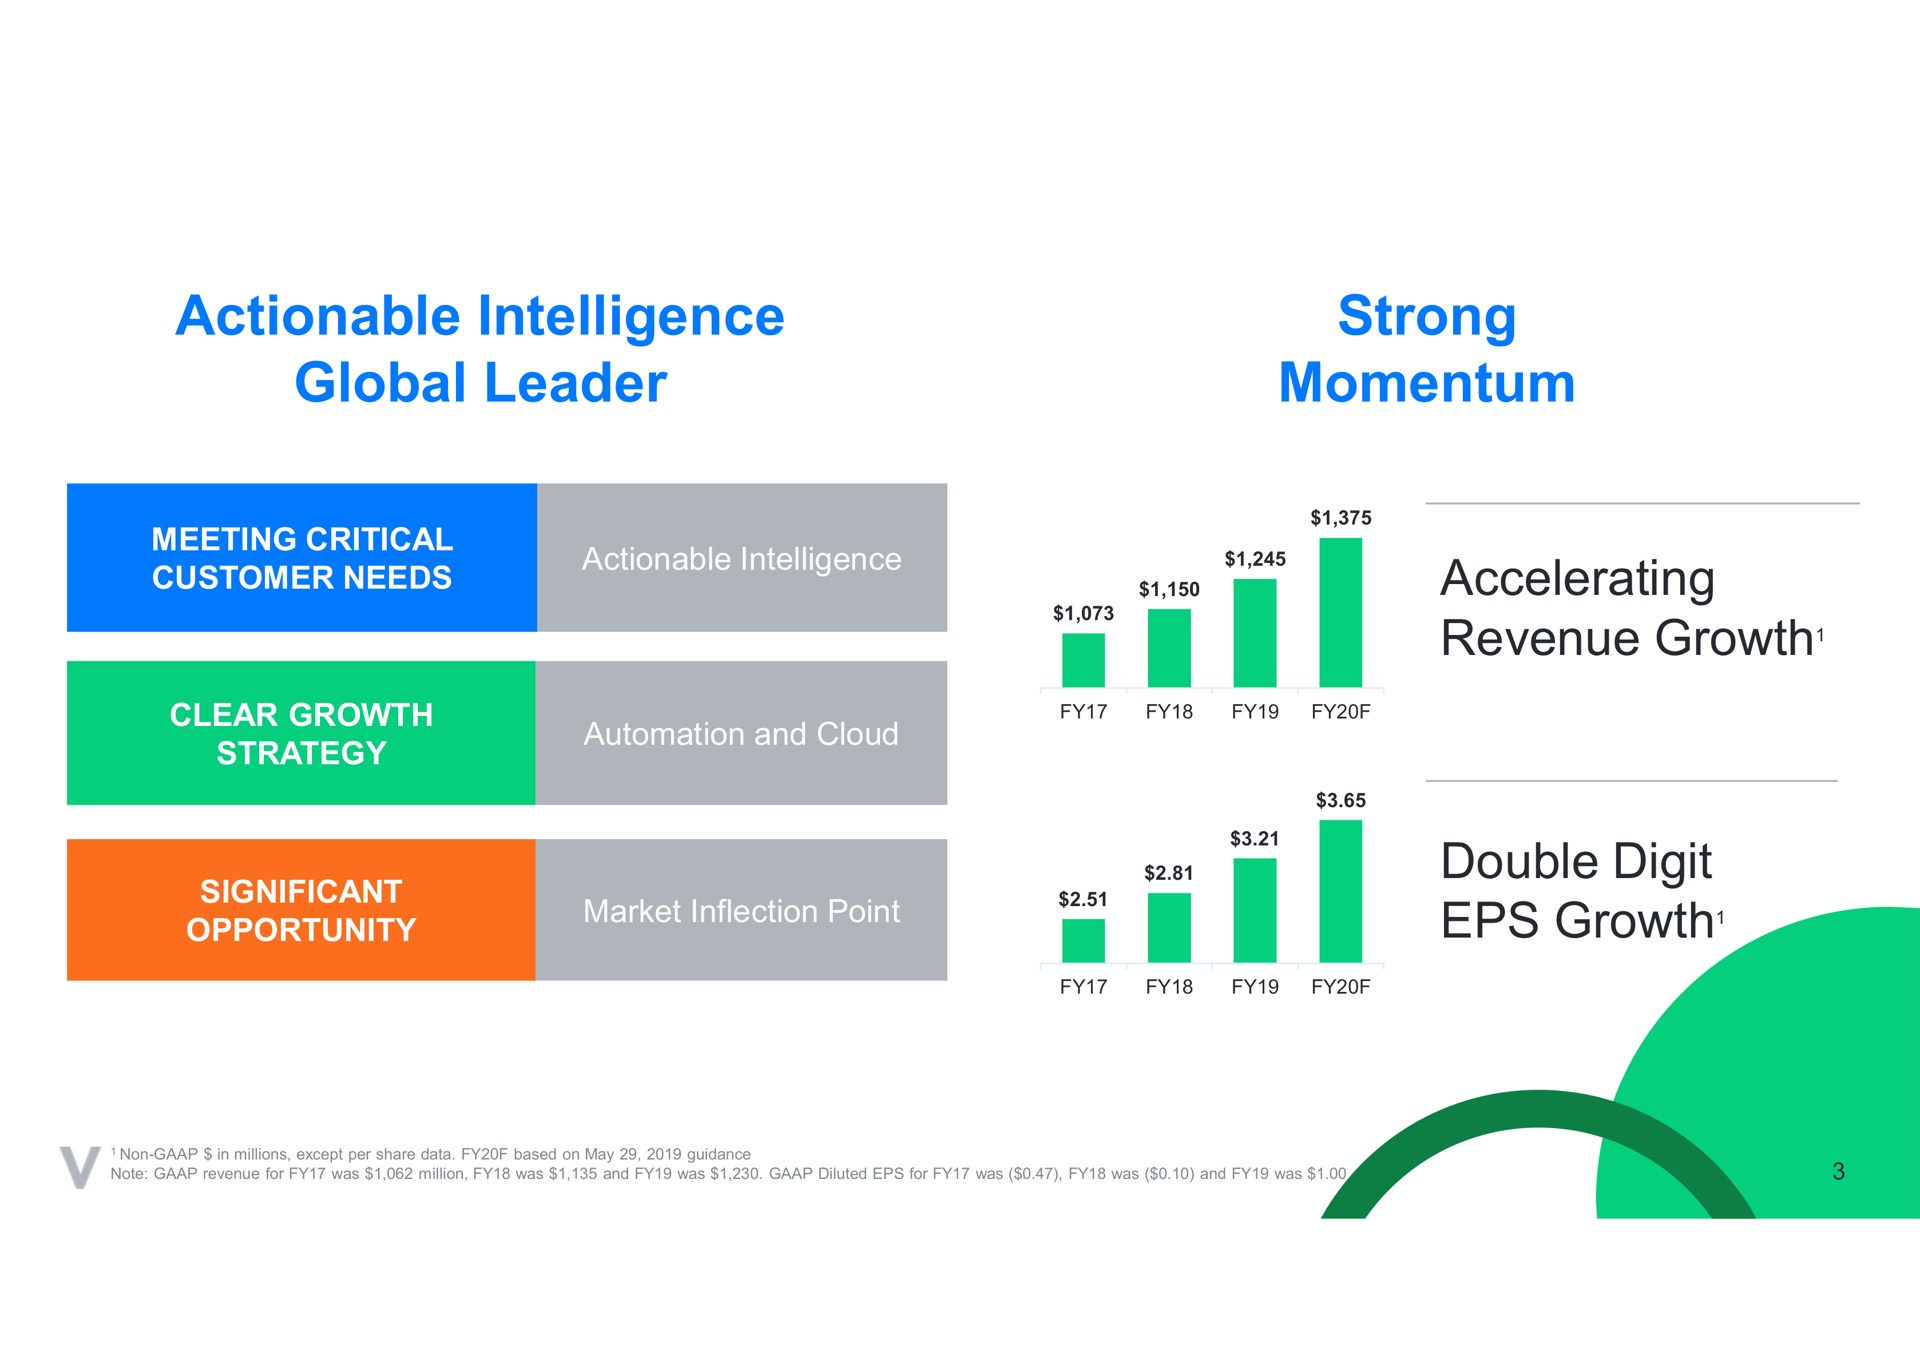 actionable intelligence global leader strong momentum accelerating revenue growth double digit growth core i growth significant | Verint